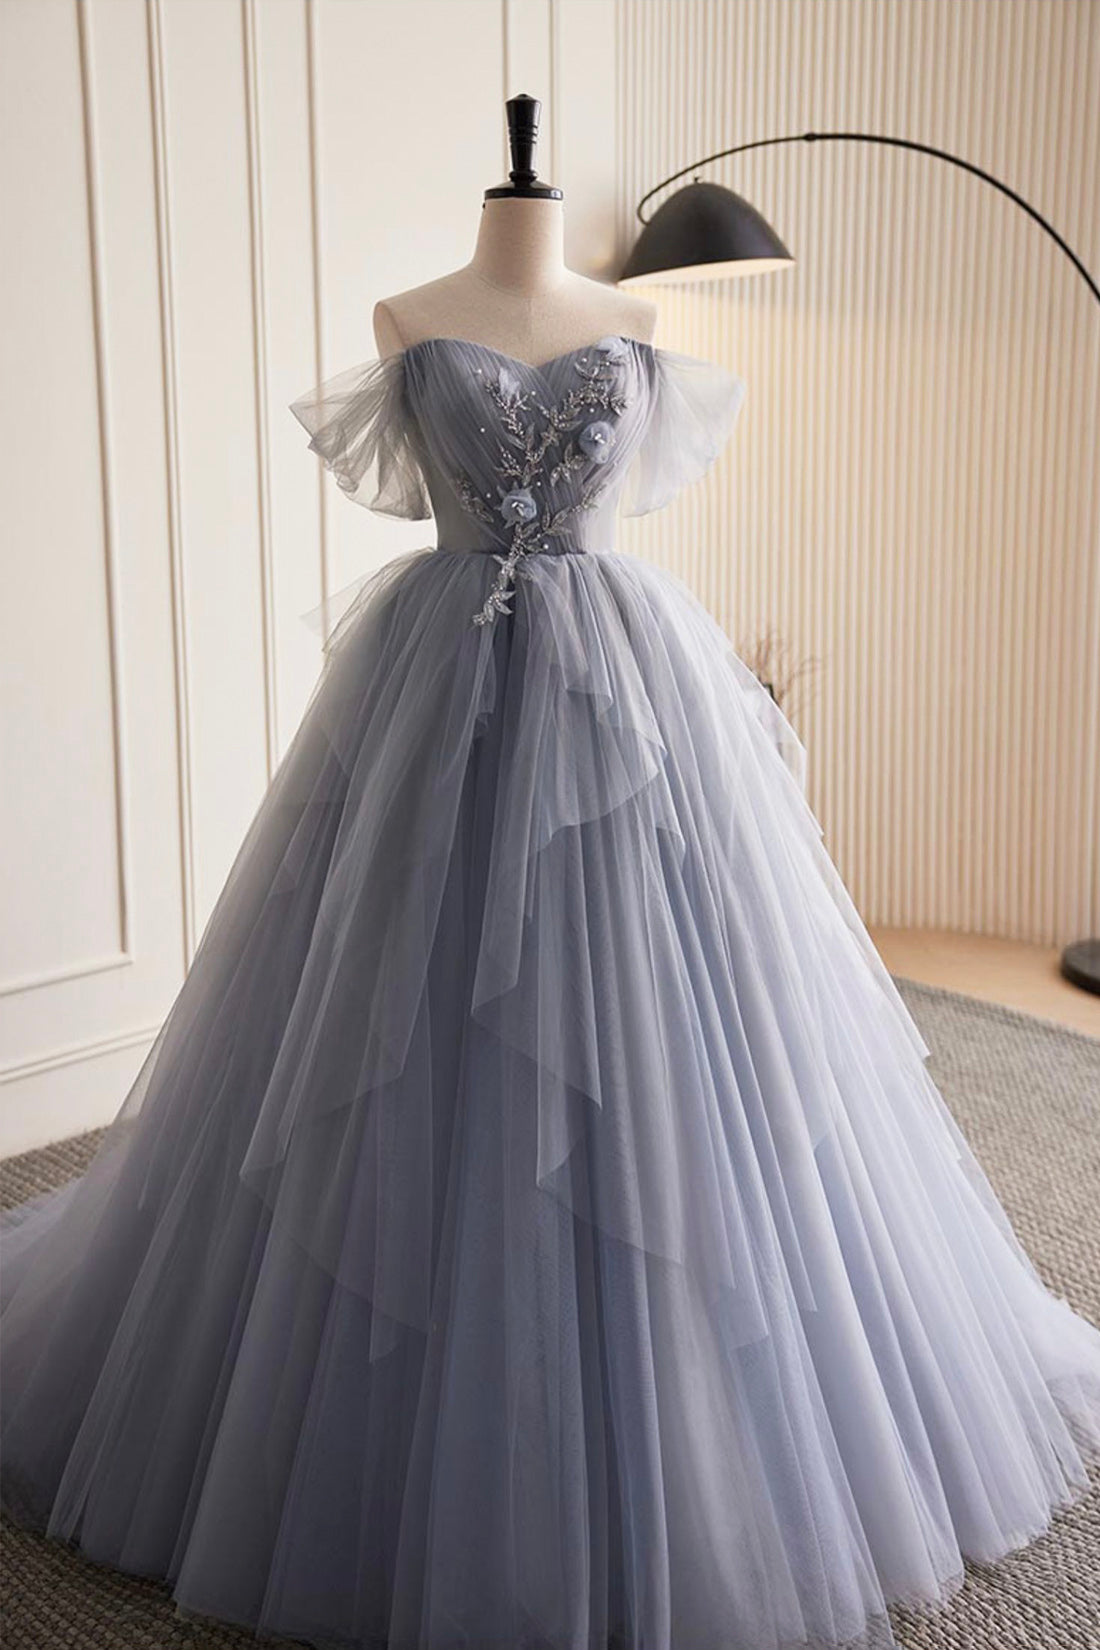 Gray Tulle Long Corset Prom Dress, Off Shoulder Evening Dress Party Dress Outfits, Bridesmaid Dresses For Winter Wedding